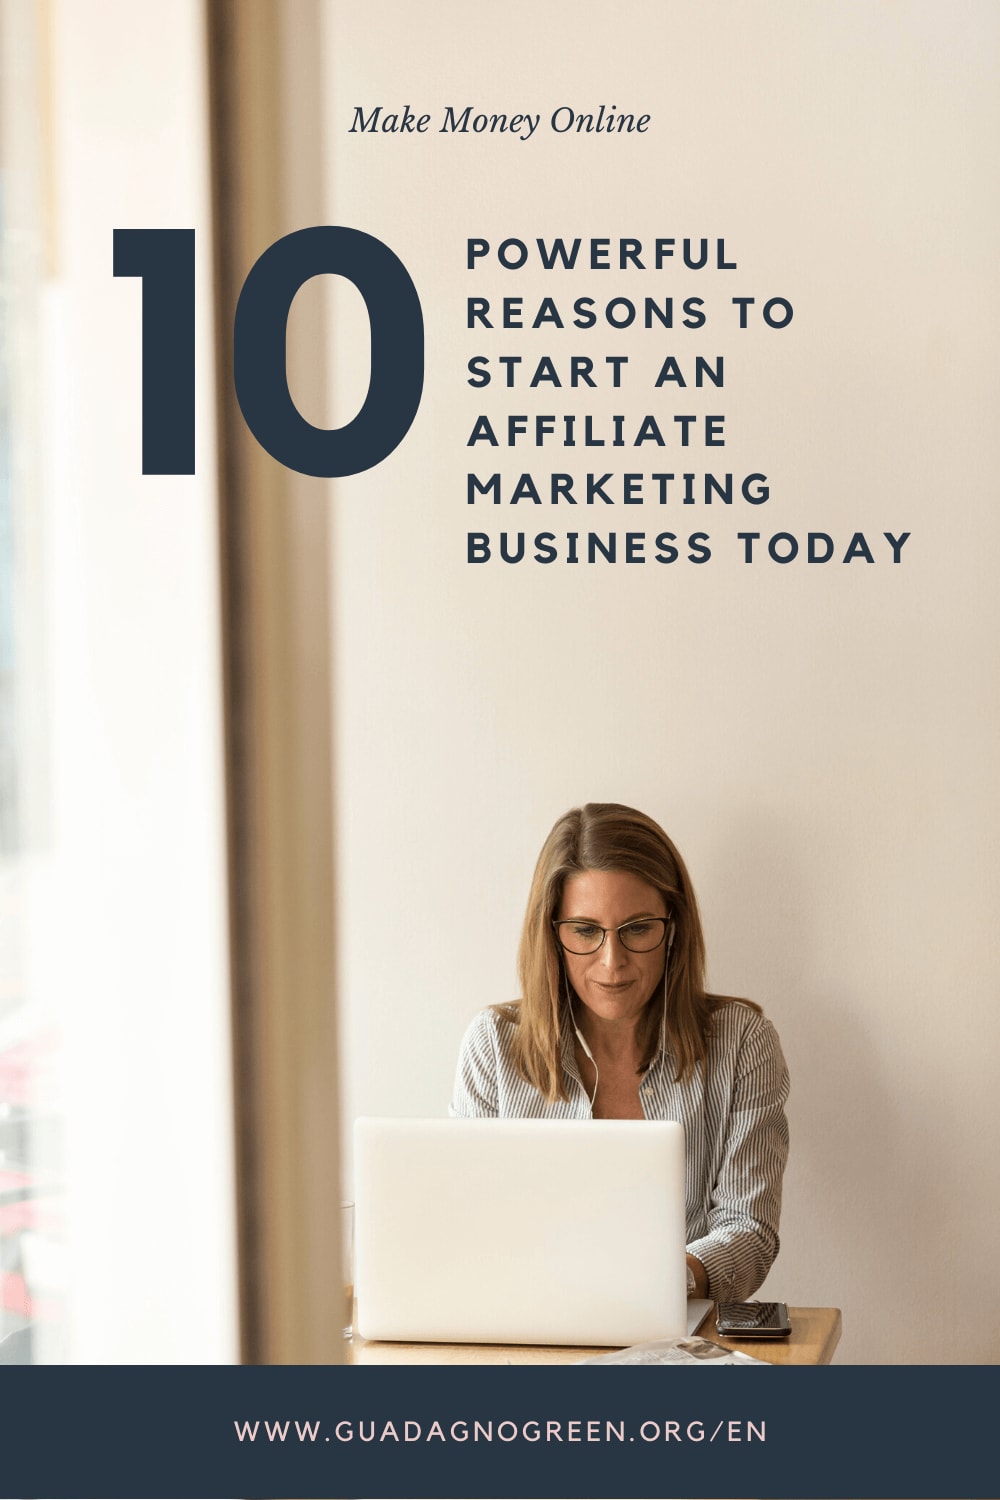 Why Start an Affiliate Marketing Business?